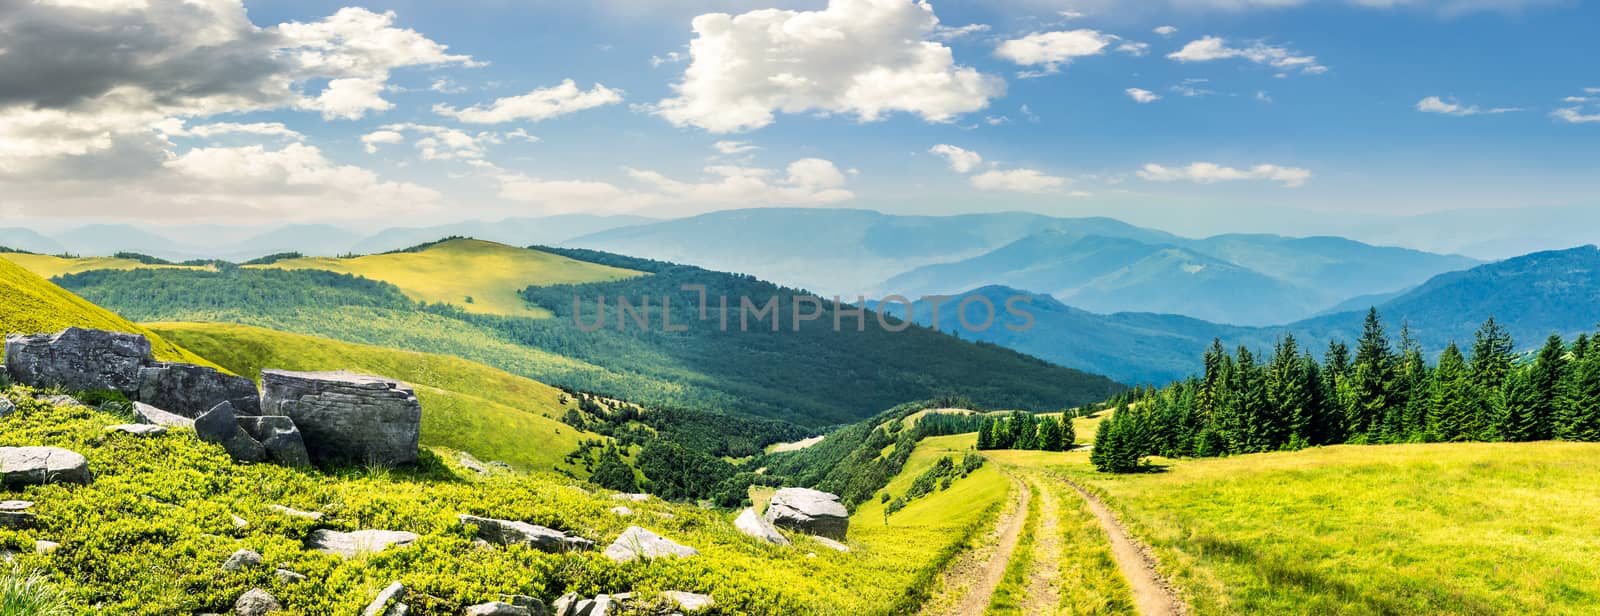 composite mountain landscape. path through meadow on mountain range with huge boulders near pine forest on hill side in morning light